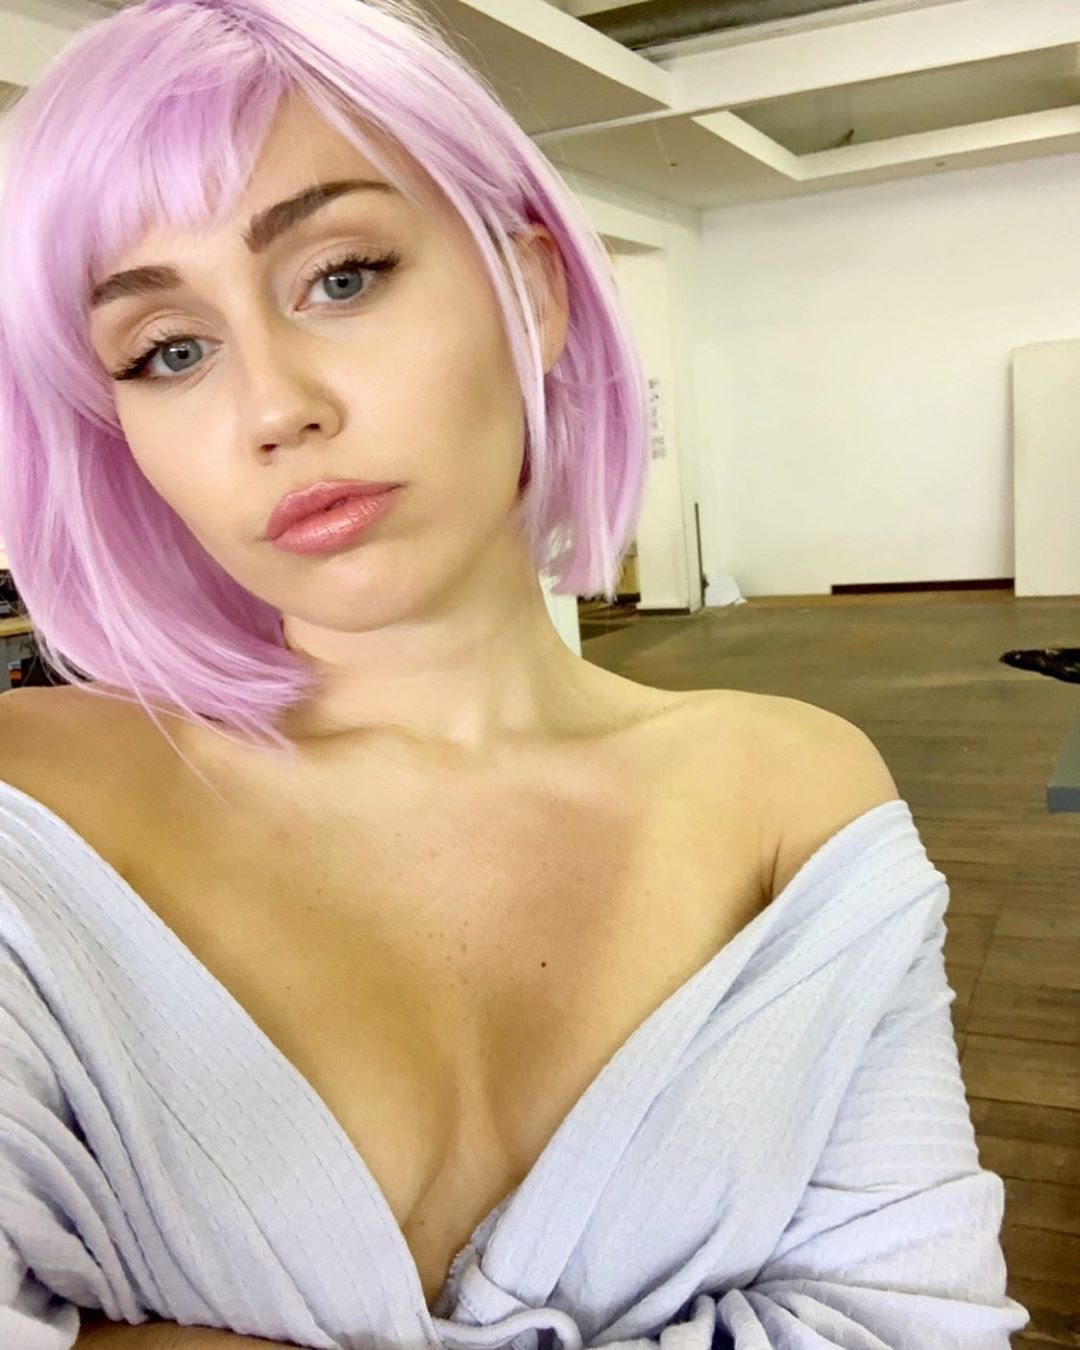 Miley Cyrus in robe and wig